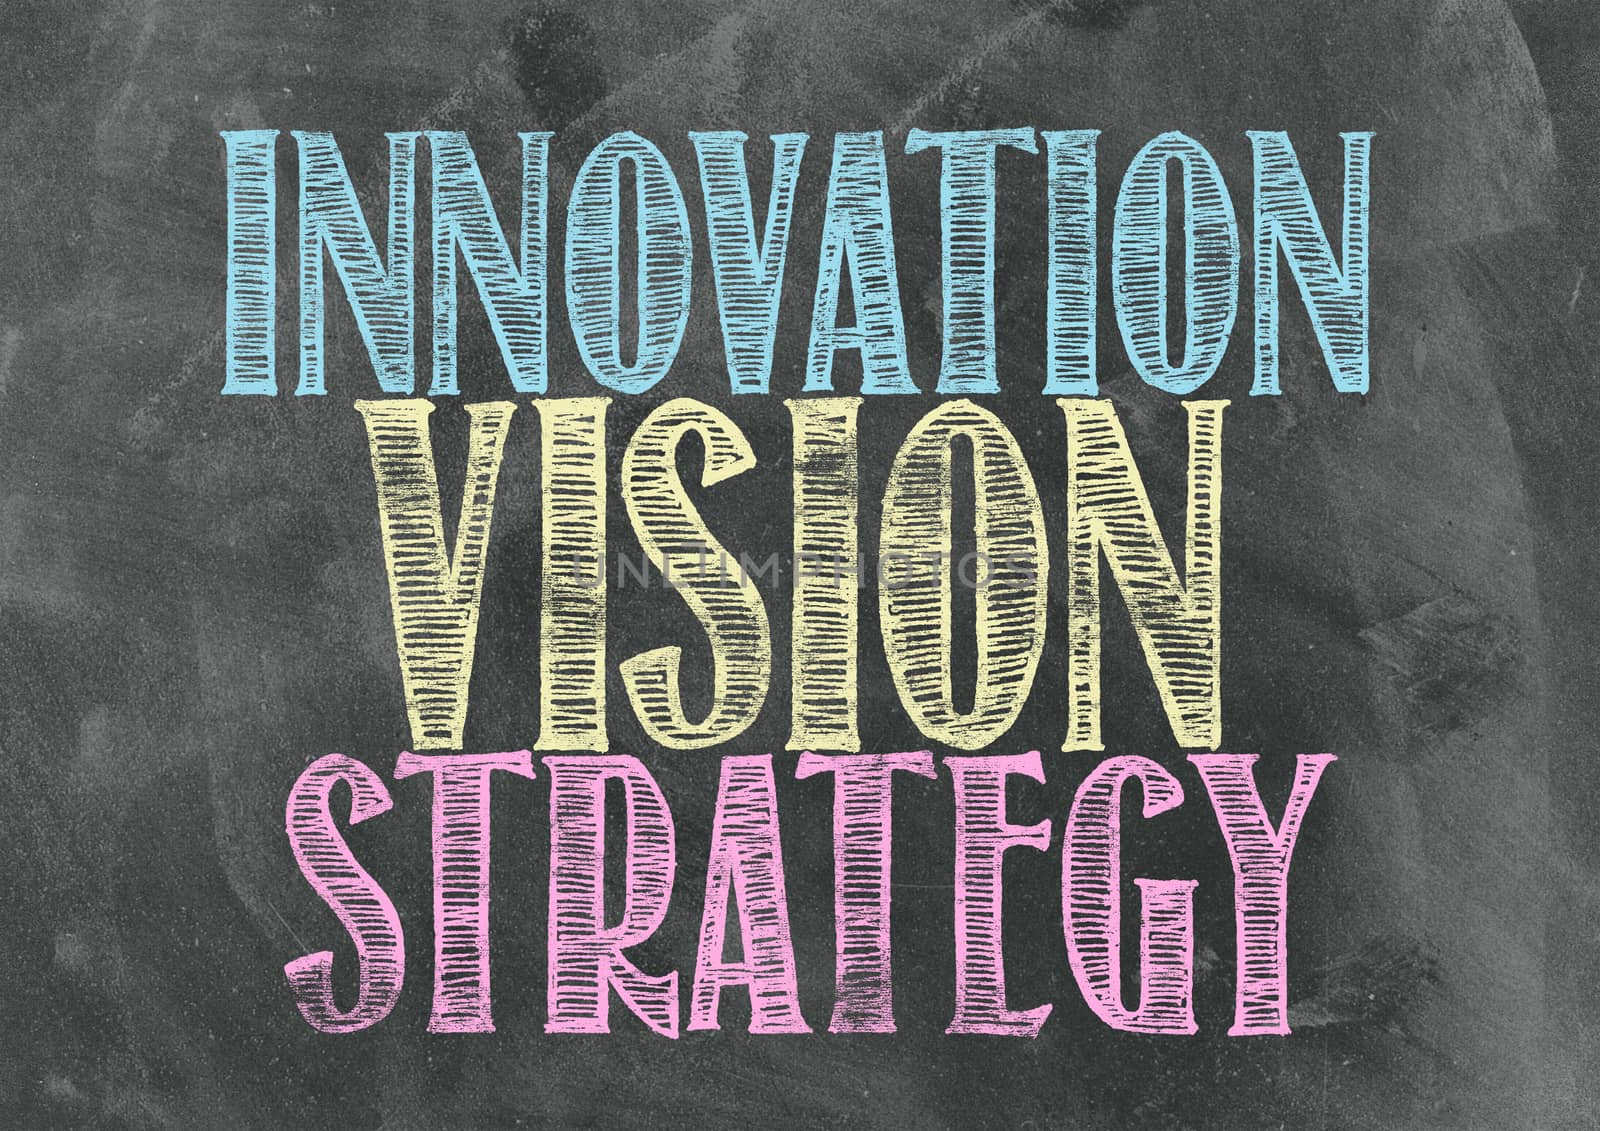  Innovation, visionon and Strategy a Blackboard